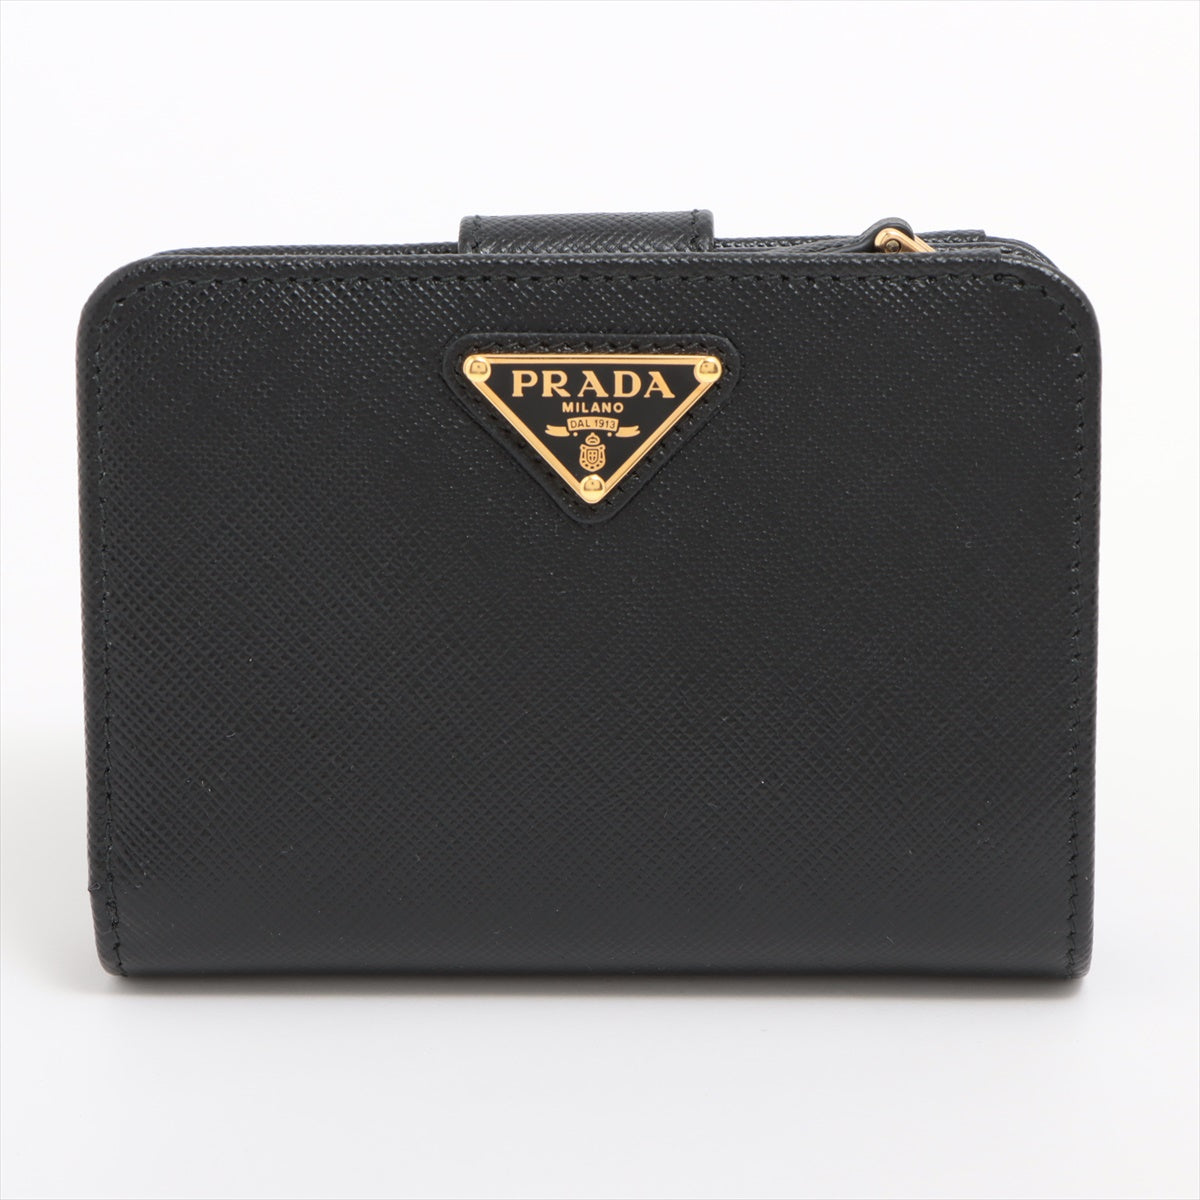 Prada Saffiano Triang 1ML018 Leather Compact Wallet Black